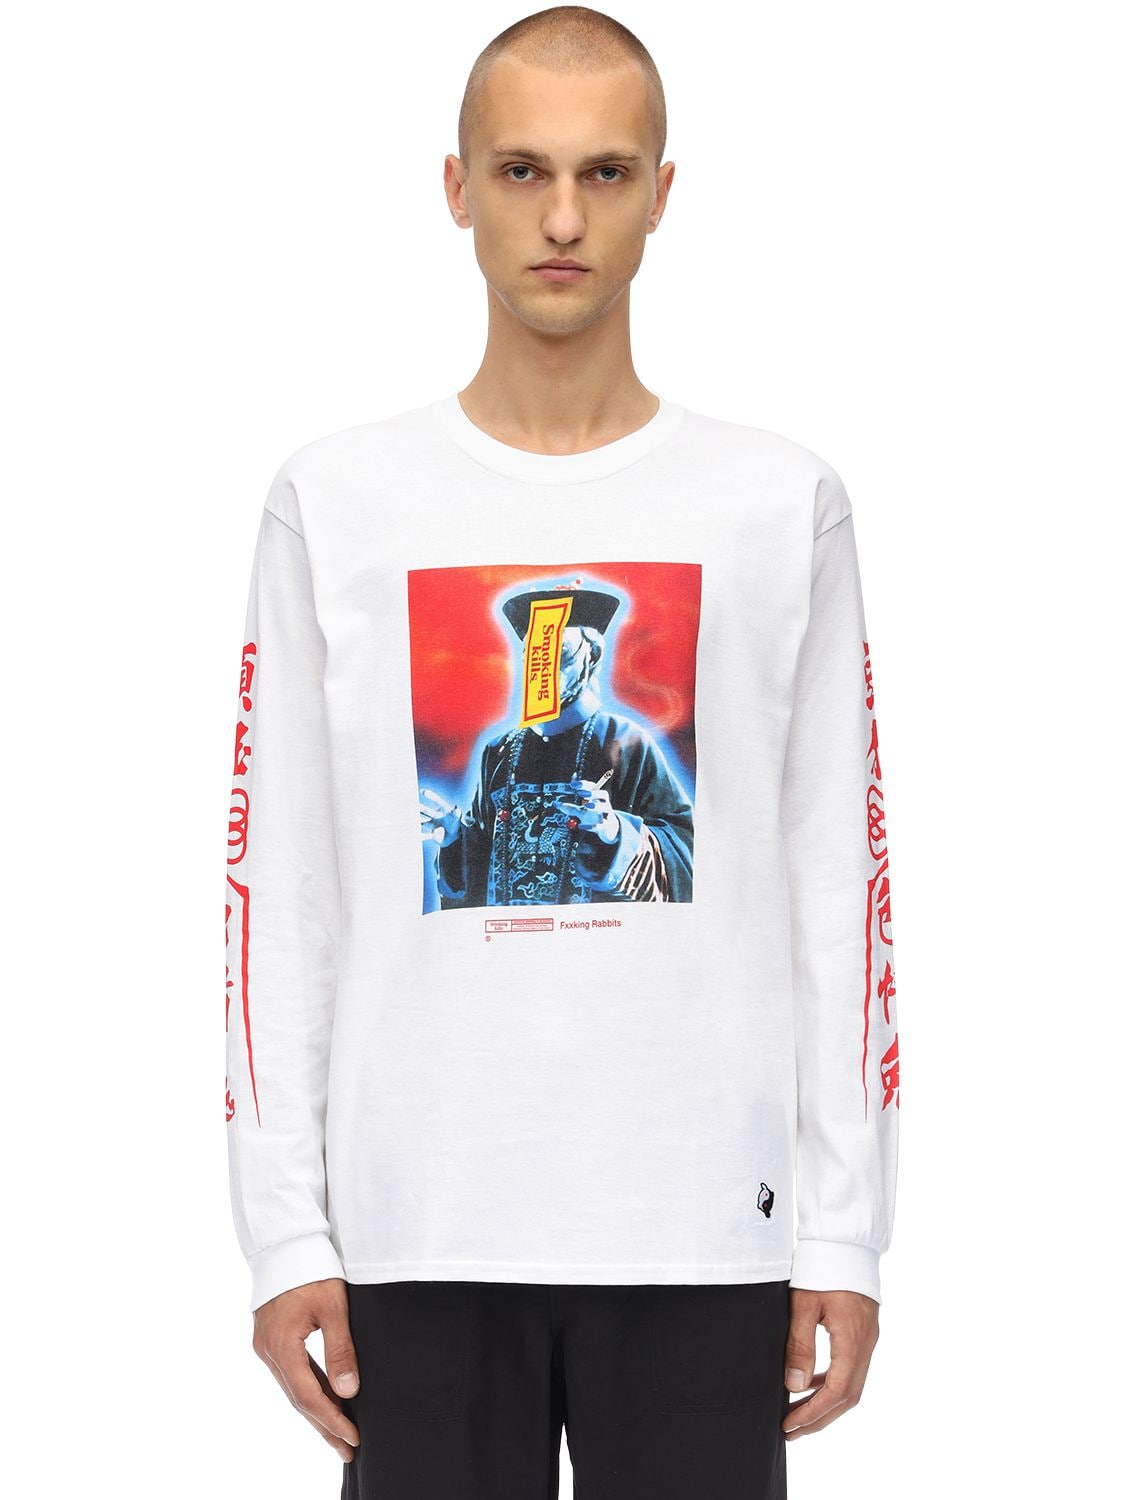 Fr2 - Fxxking Rabbits - The zombie ls cotton jersey t-shirt - White